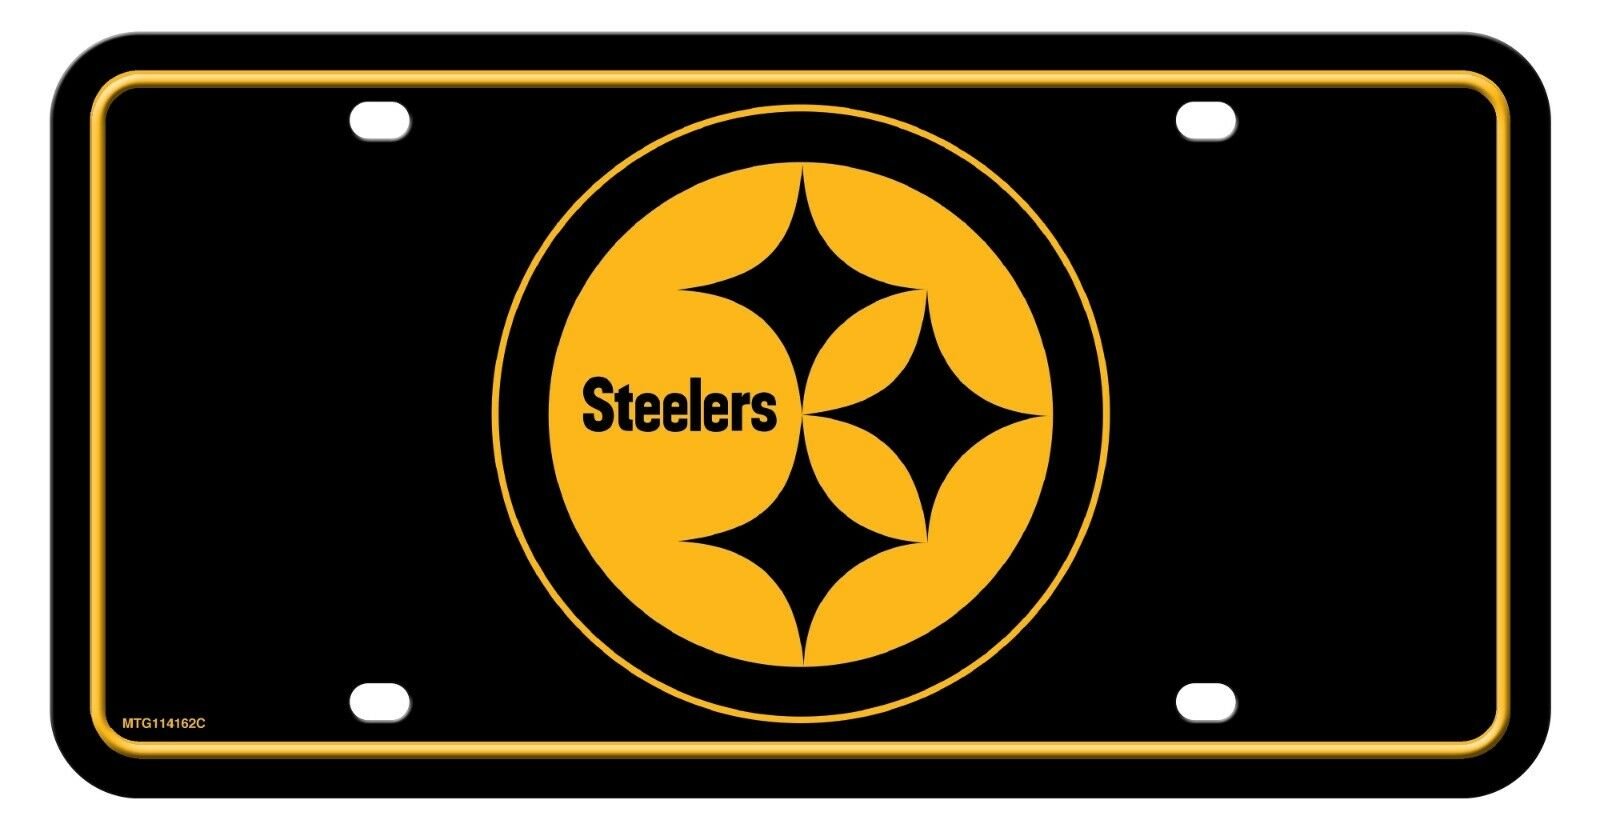 Pittsburgh Steelers Metal Auto Tag License Plate, Black and Gold Design, 6x12 Inch